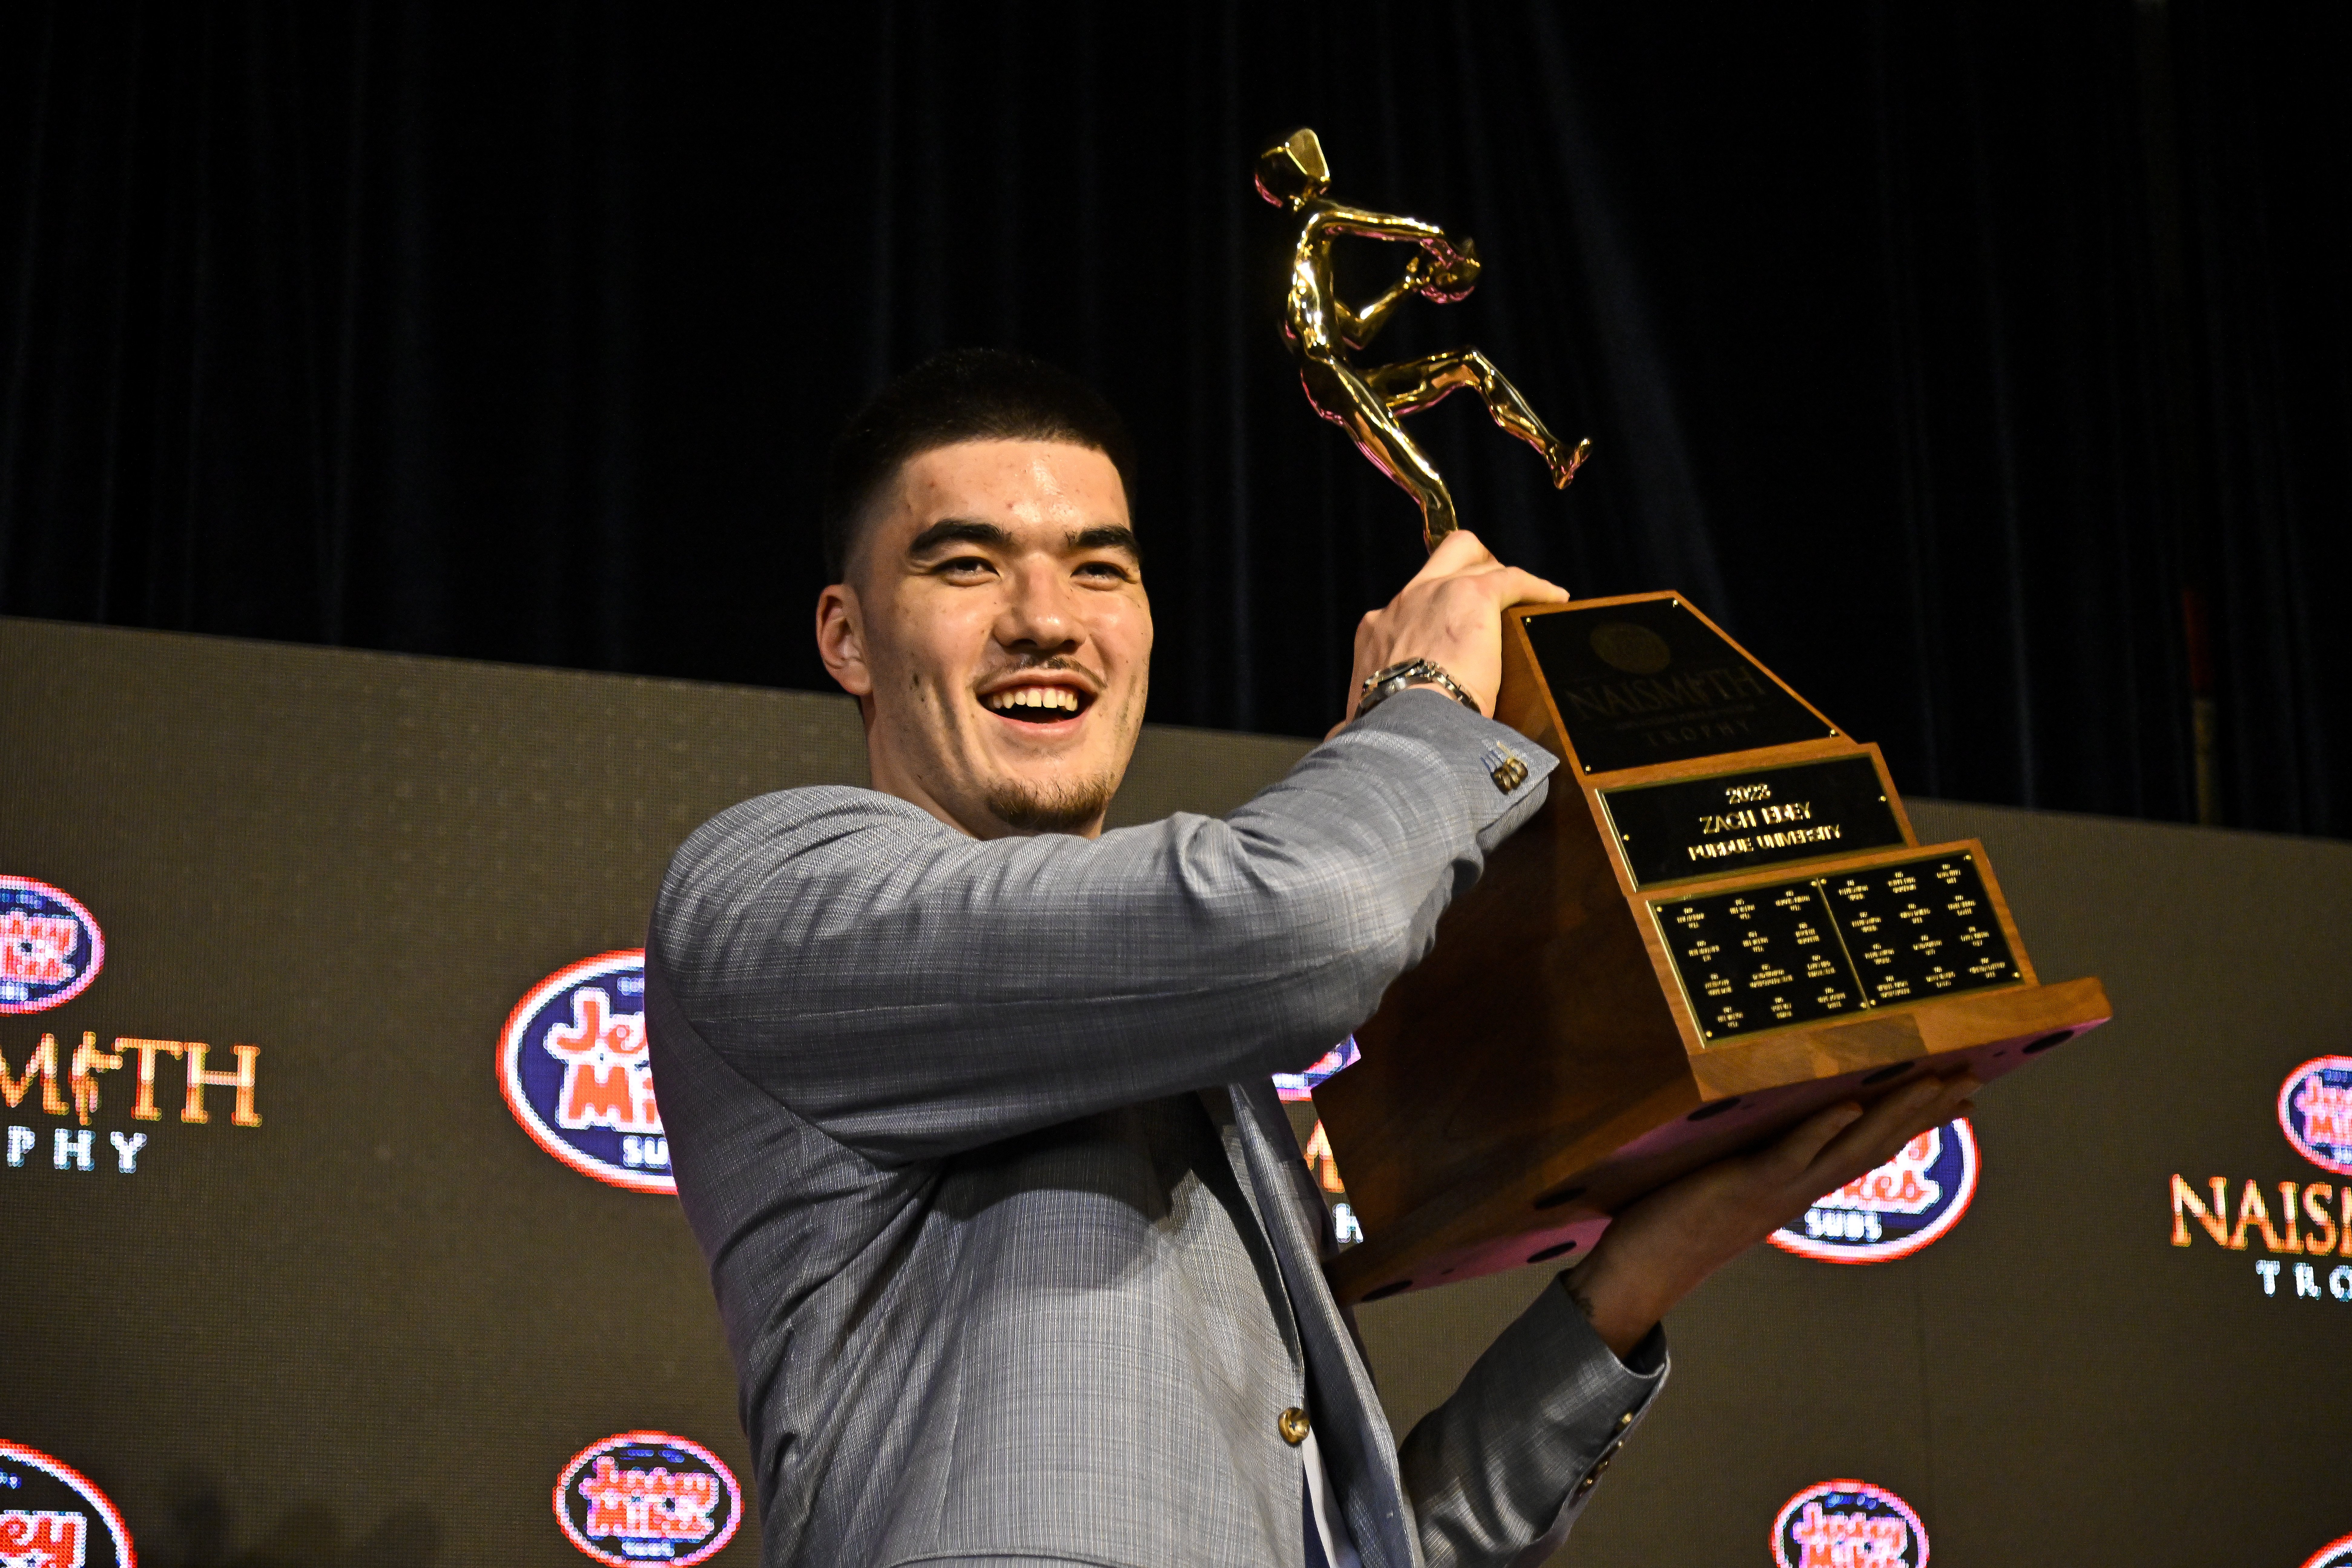 Zach Edey is presented with the Naismith Men's College Player of the Year trophy during the 2023 Naismith Hall of Fame Brunch at The Ballroom at Bayou Place on April 2, 2023, in Houston, Texas. | Source: Getty Images